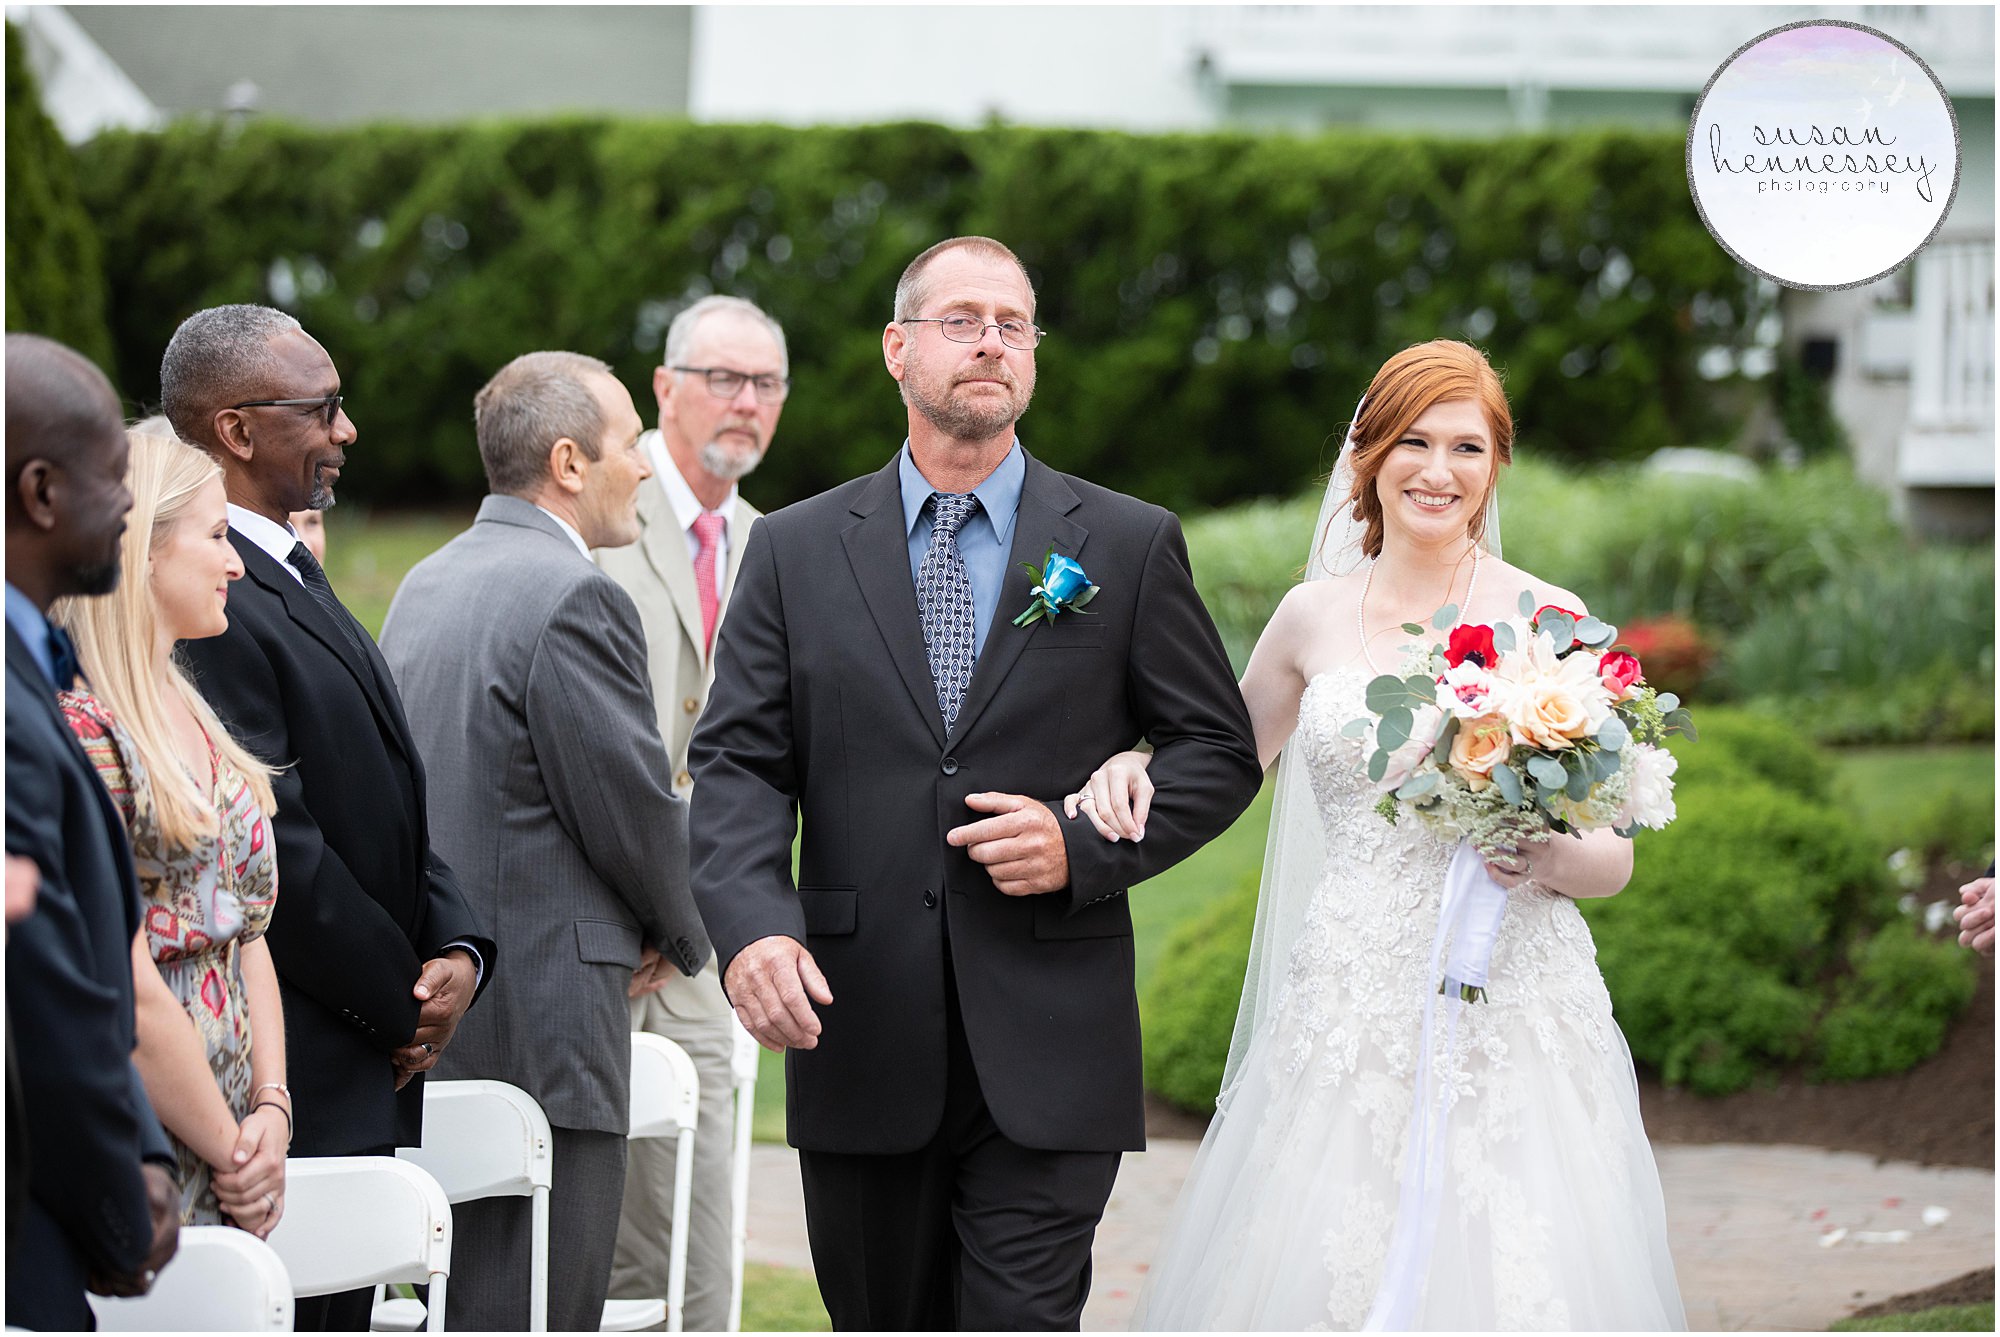 A bride walking down the aisle with her father